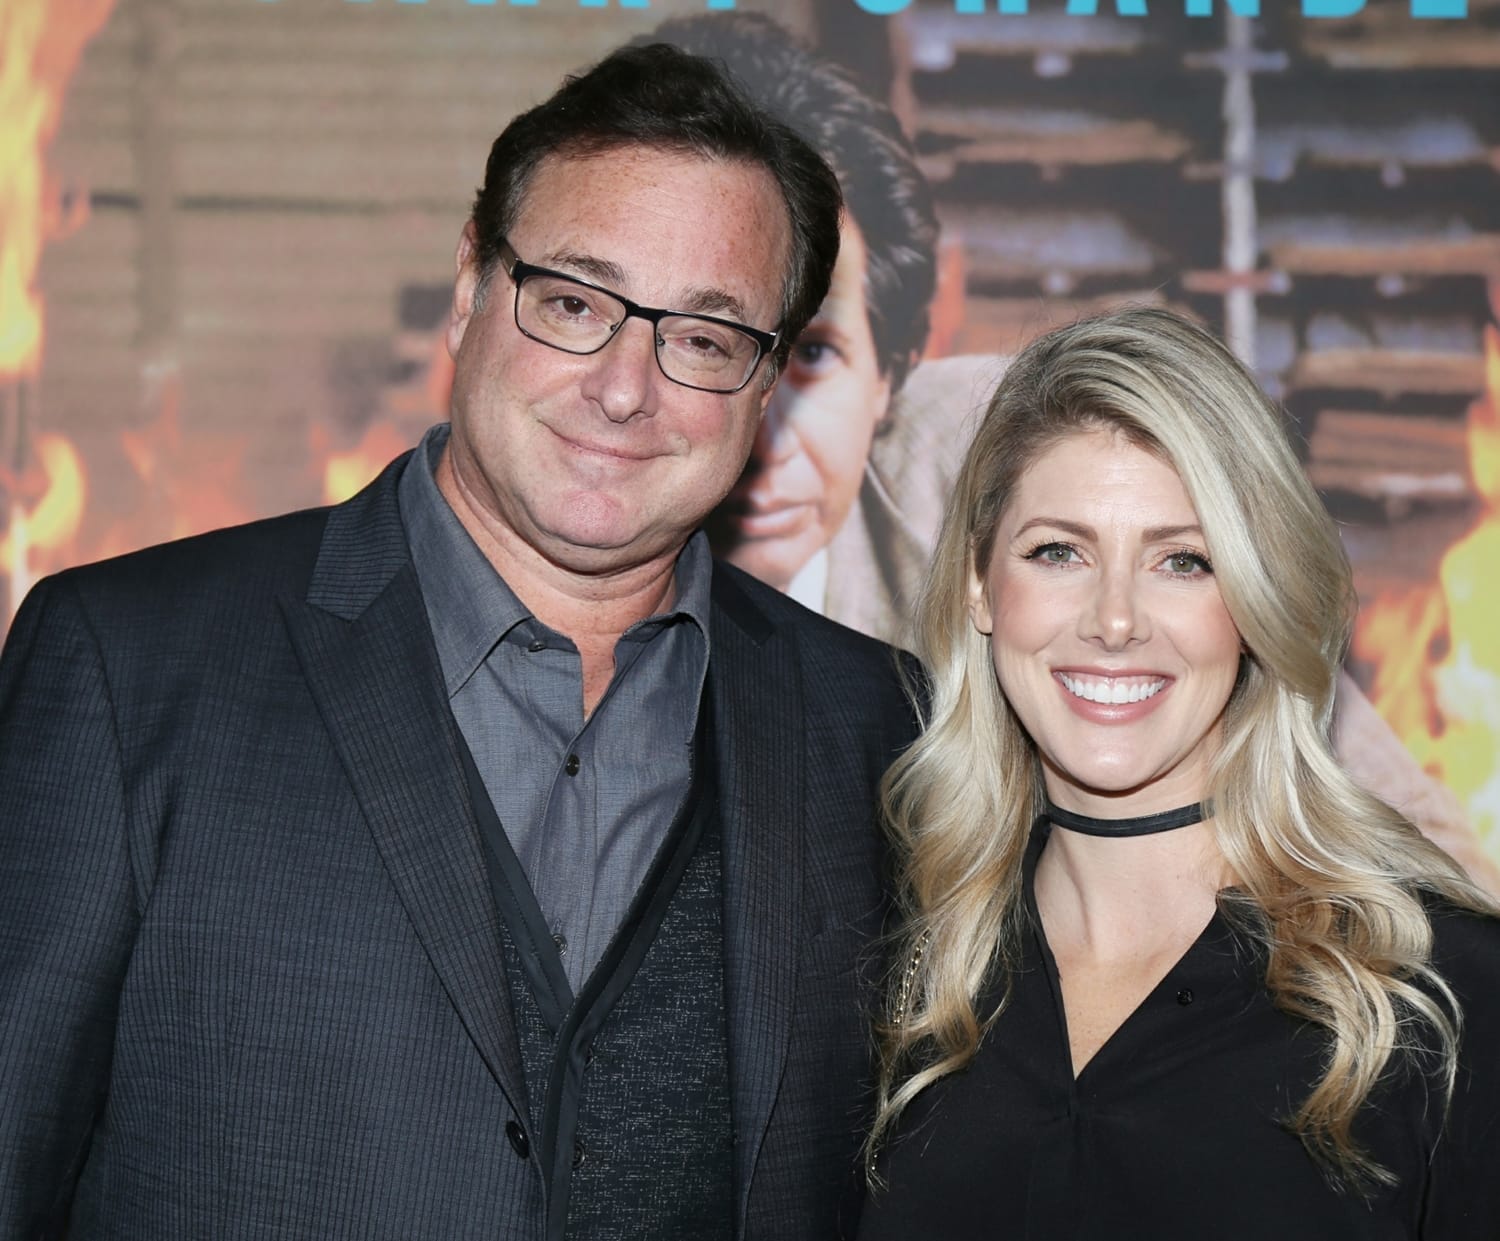 Kelly Rizzo decided to sell their home following the death of her husband Bob Saget